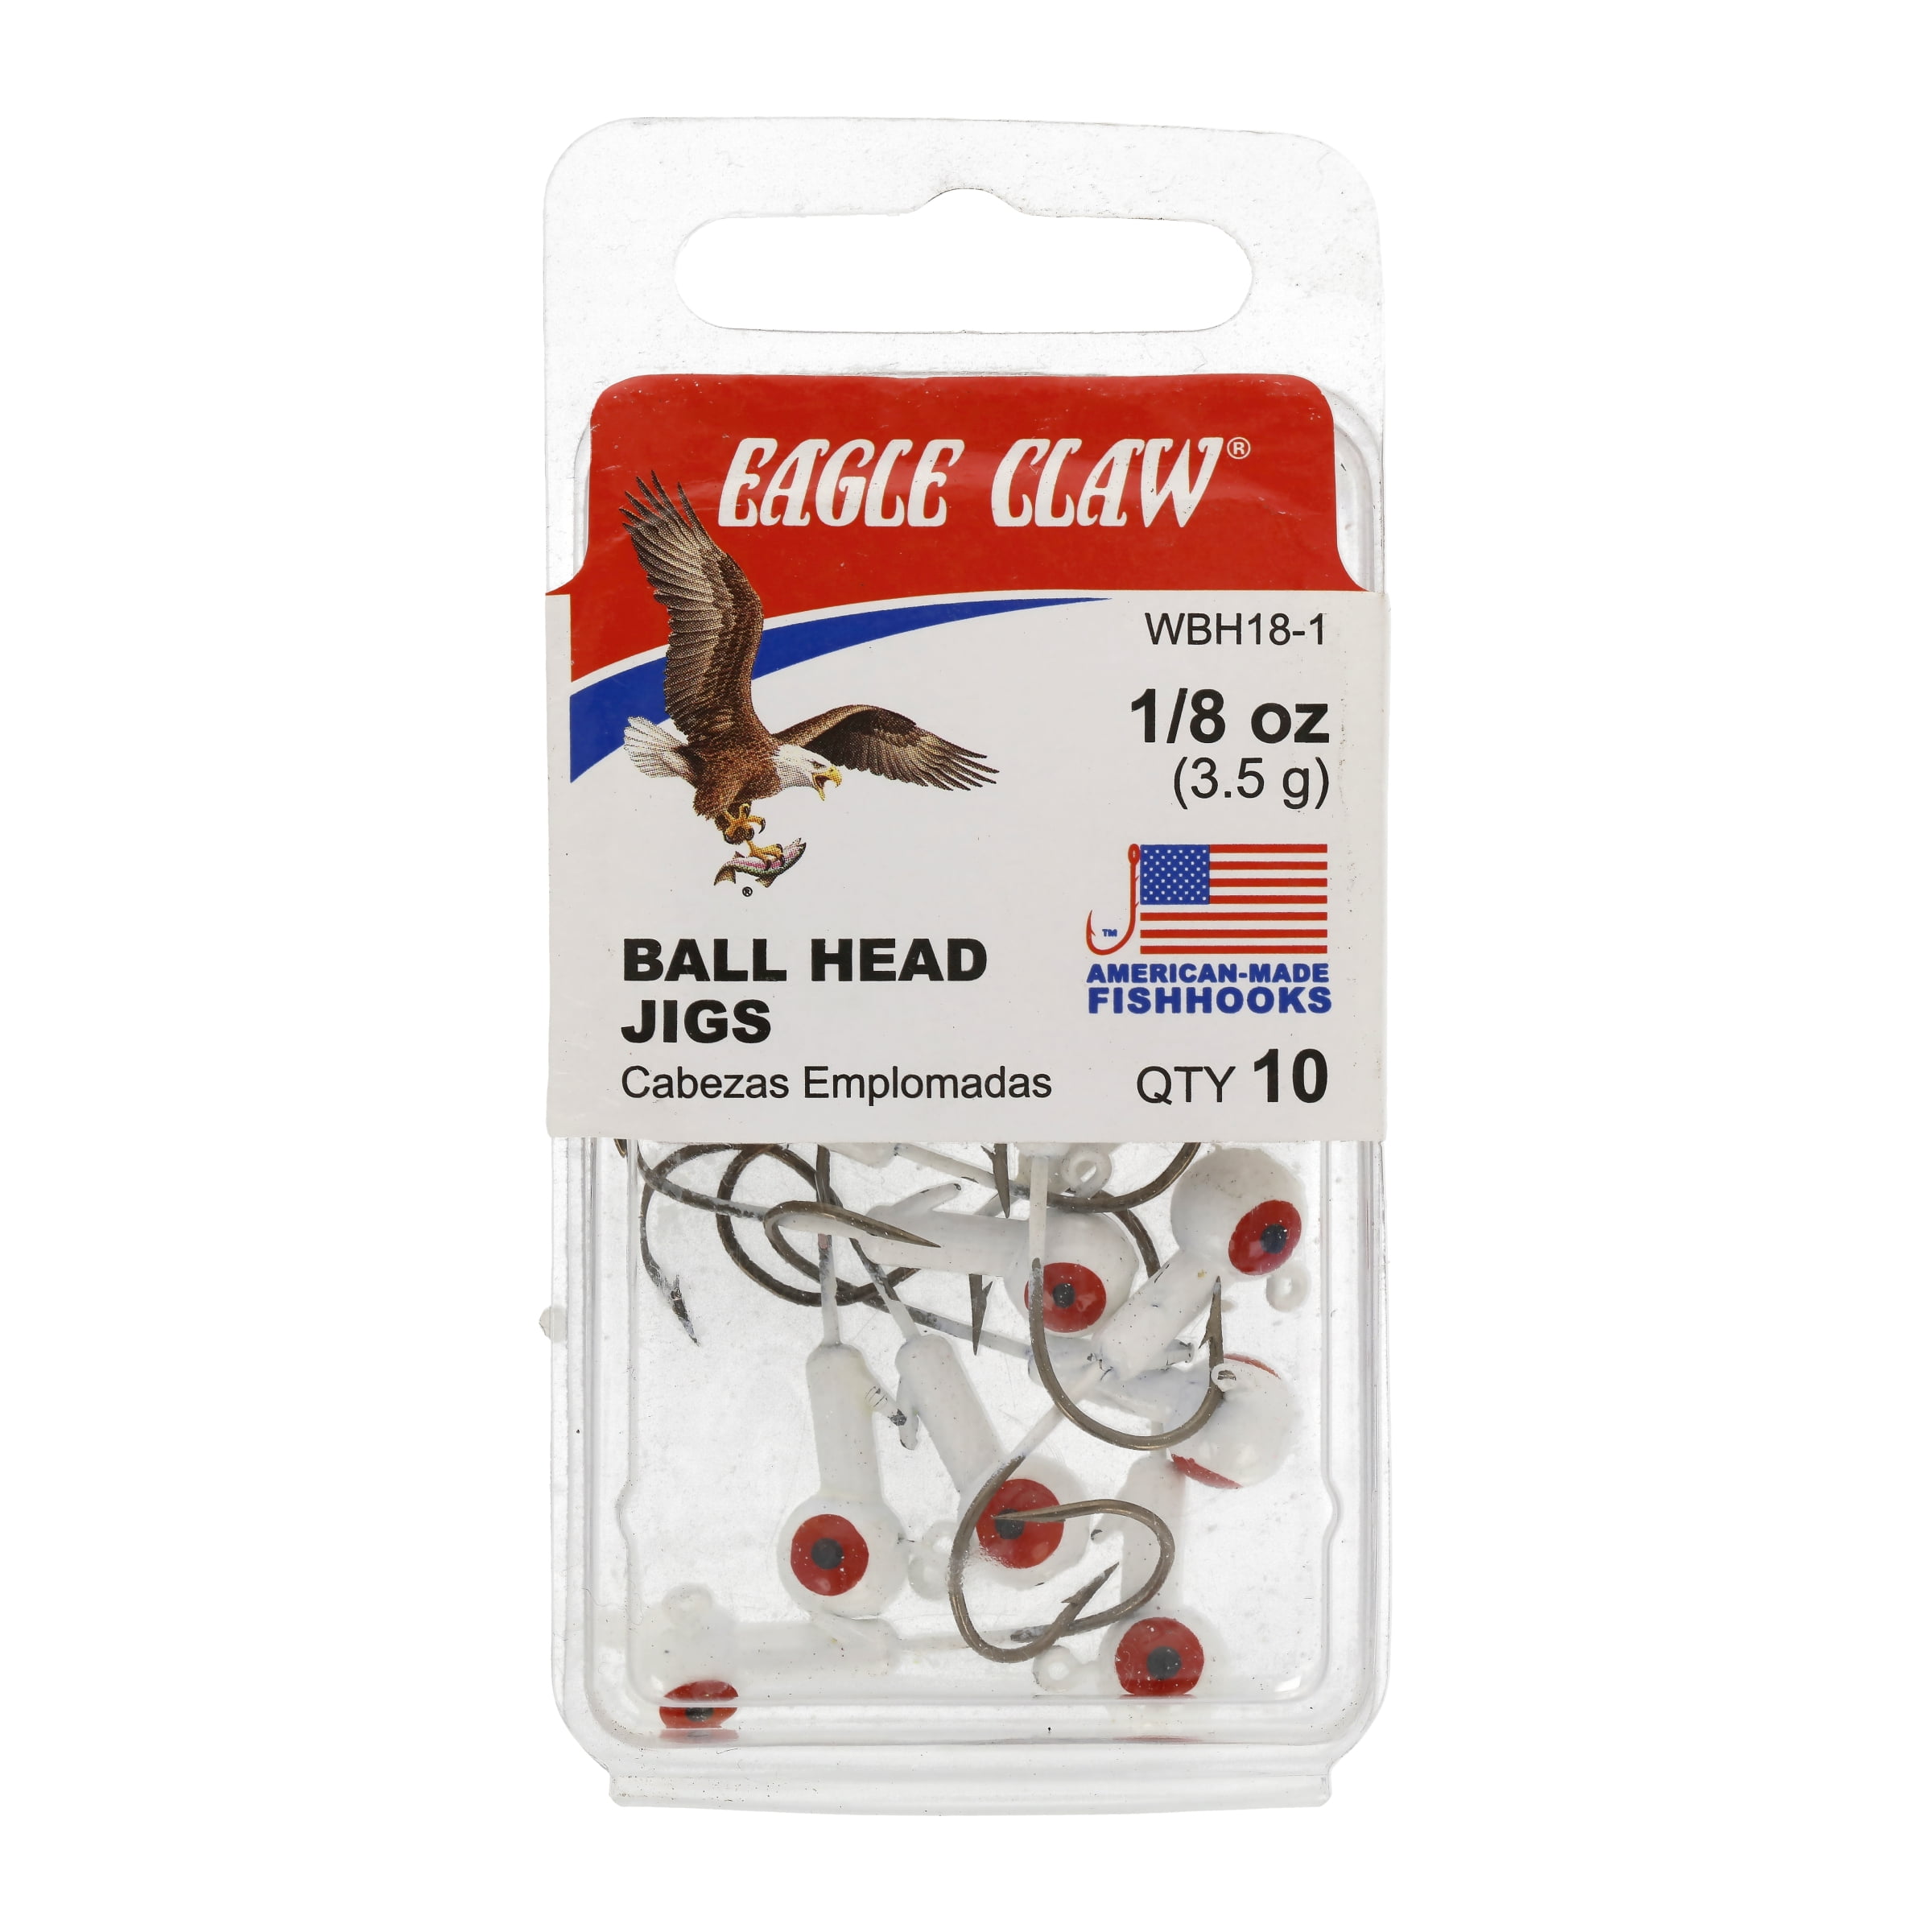 Eagle Claw Ball Head Fishing Jig, White with Red Eye, 1/8 oz., 10